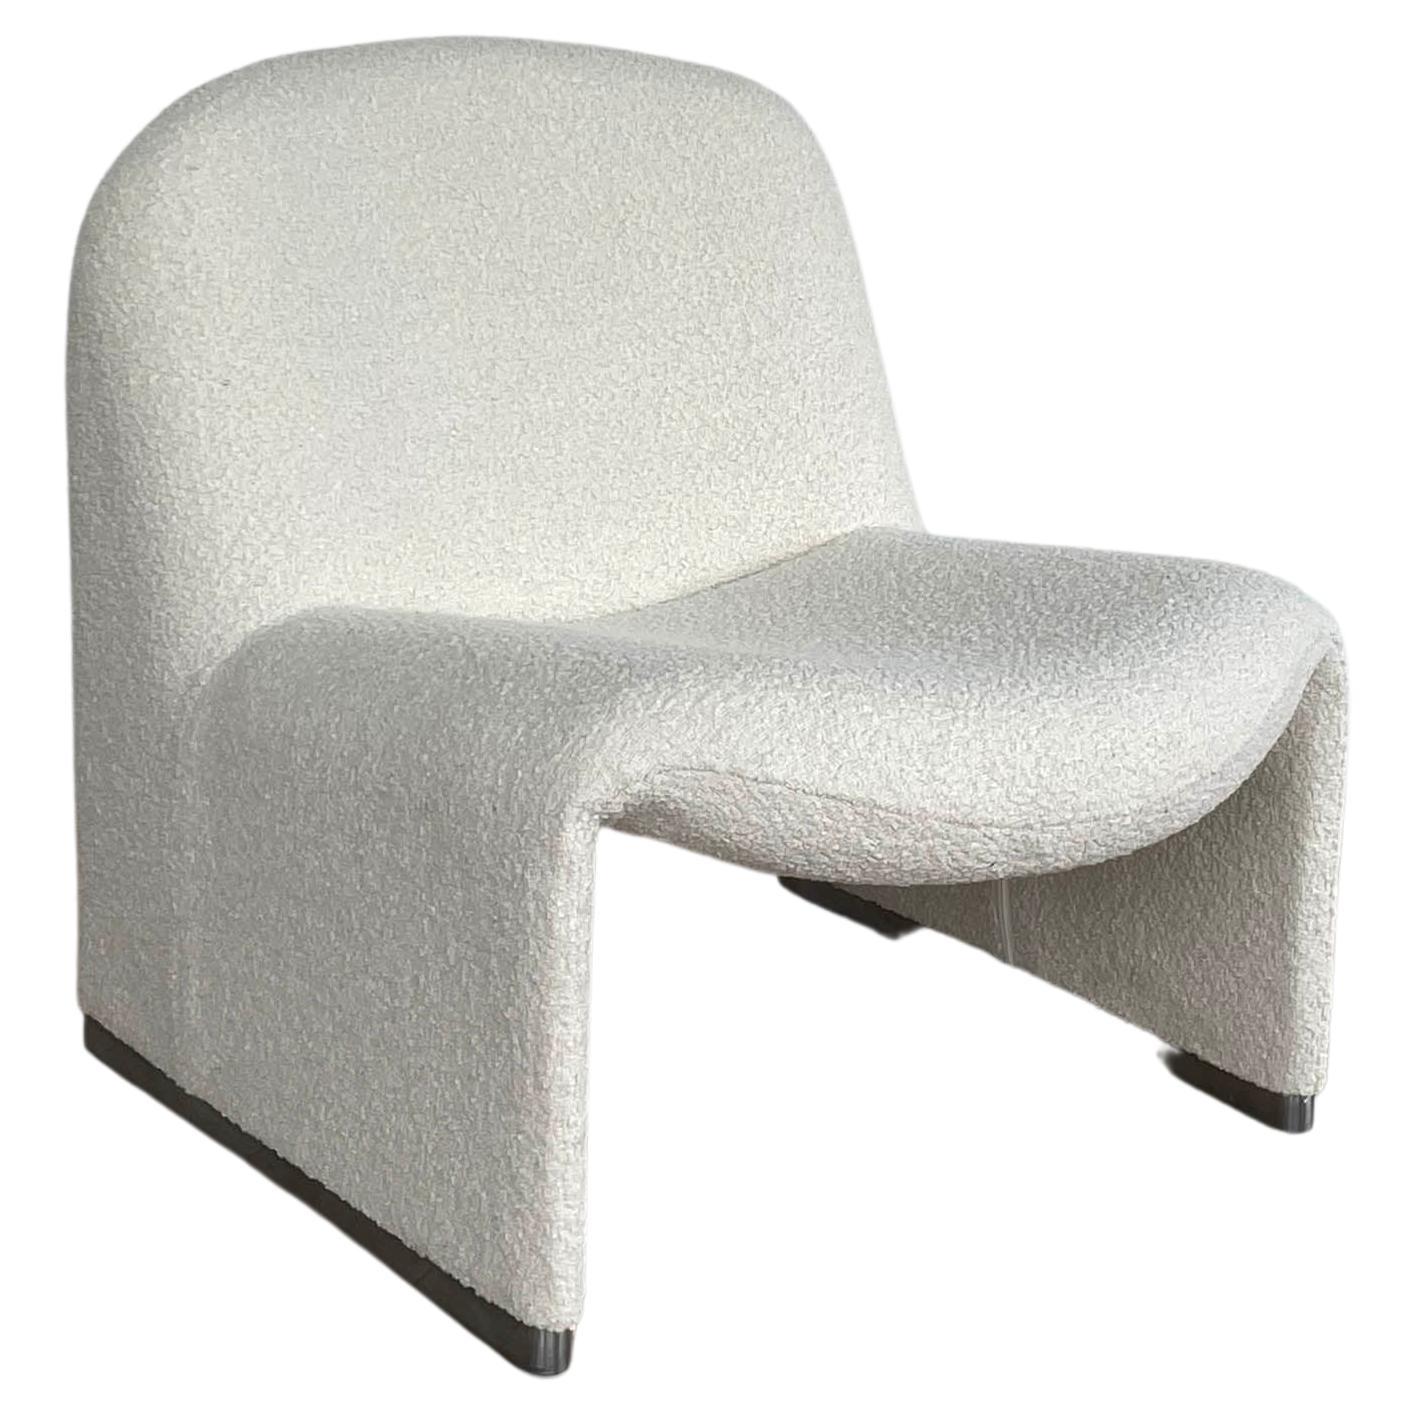 Mid Century Giancarlo Piretti "Alky" Chair Ivory Boucle, 1969, newly upholstered